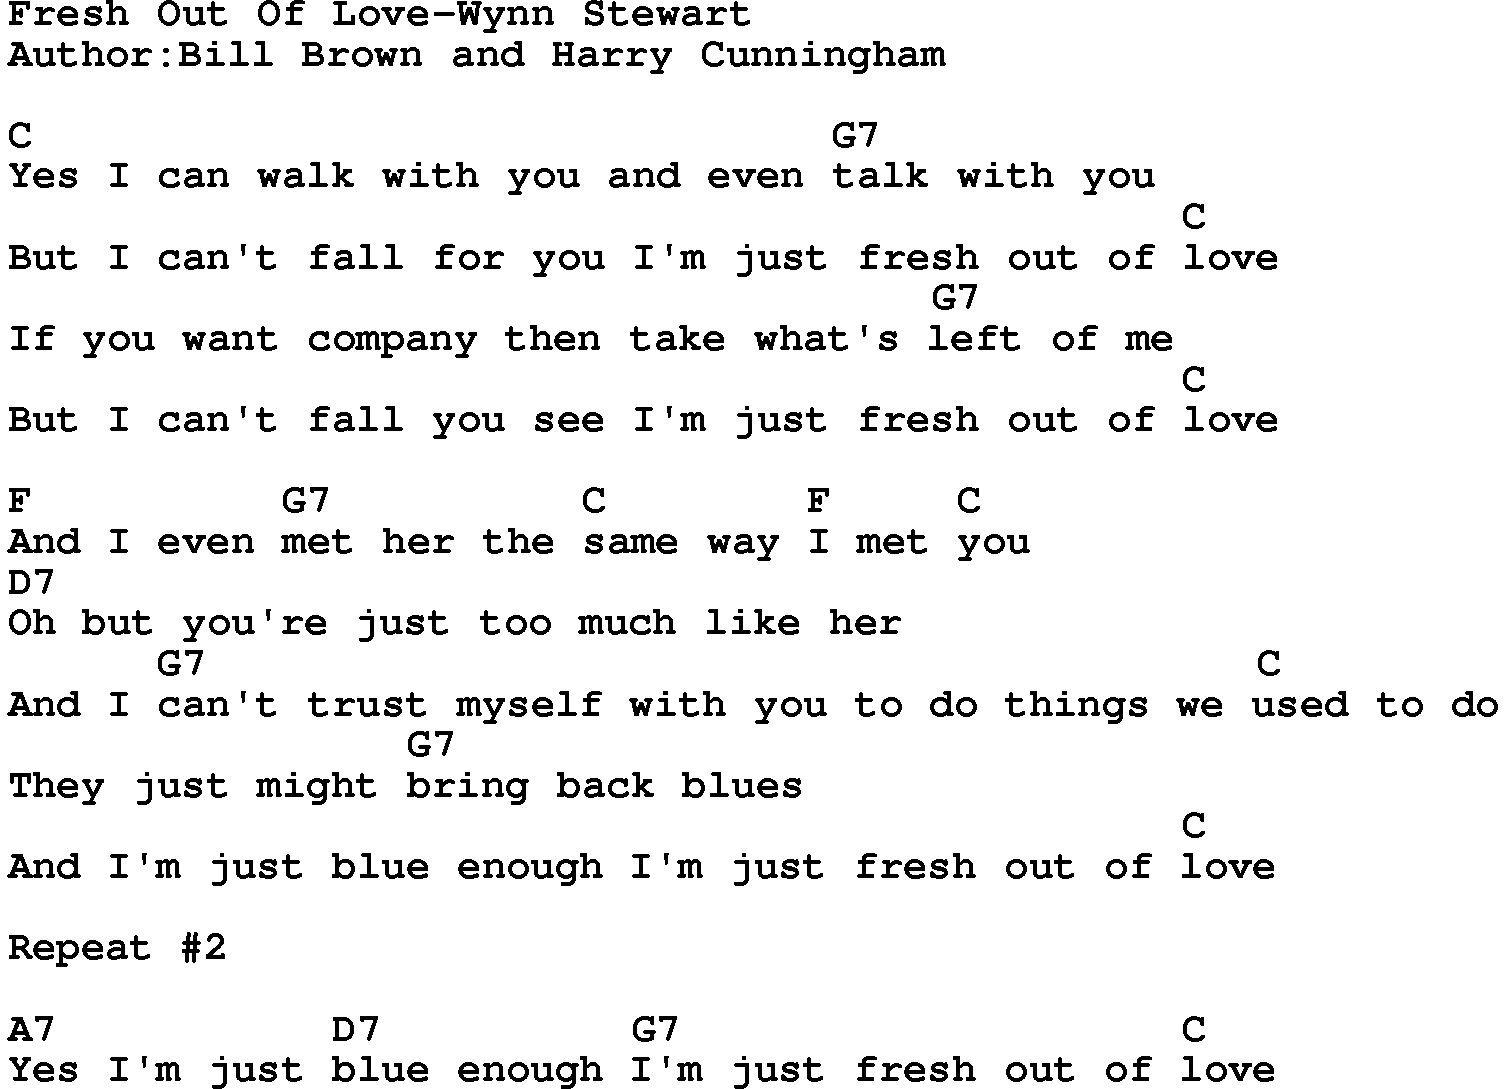 Country music song: Fresh Out Of Love-Wynn Stewart lyrics and chords